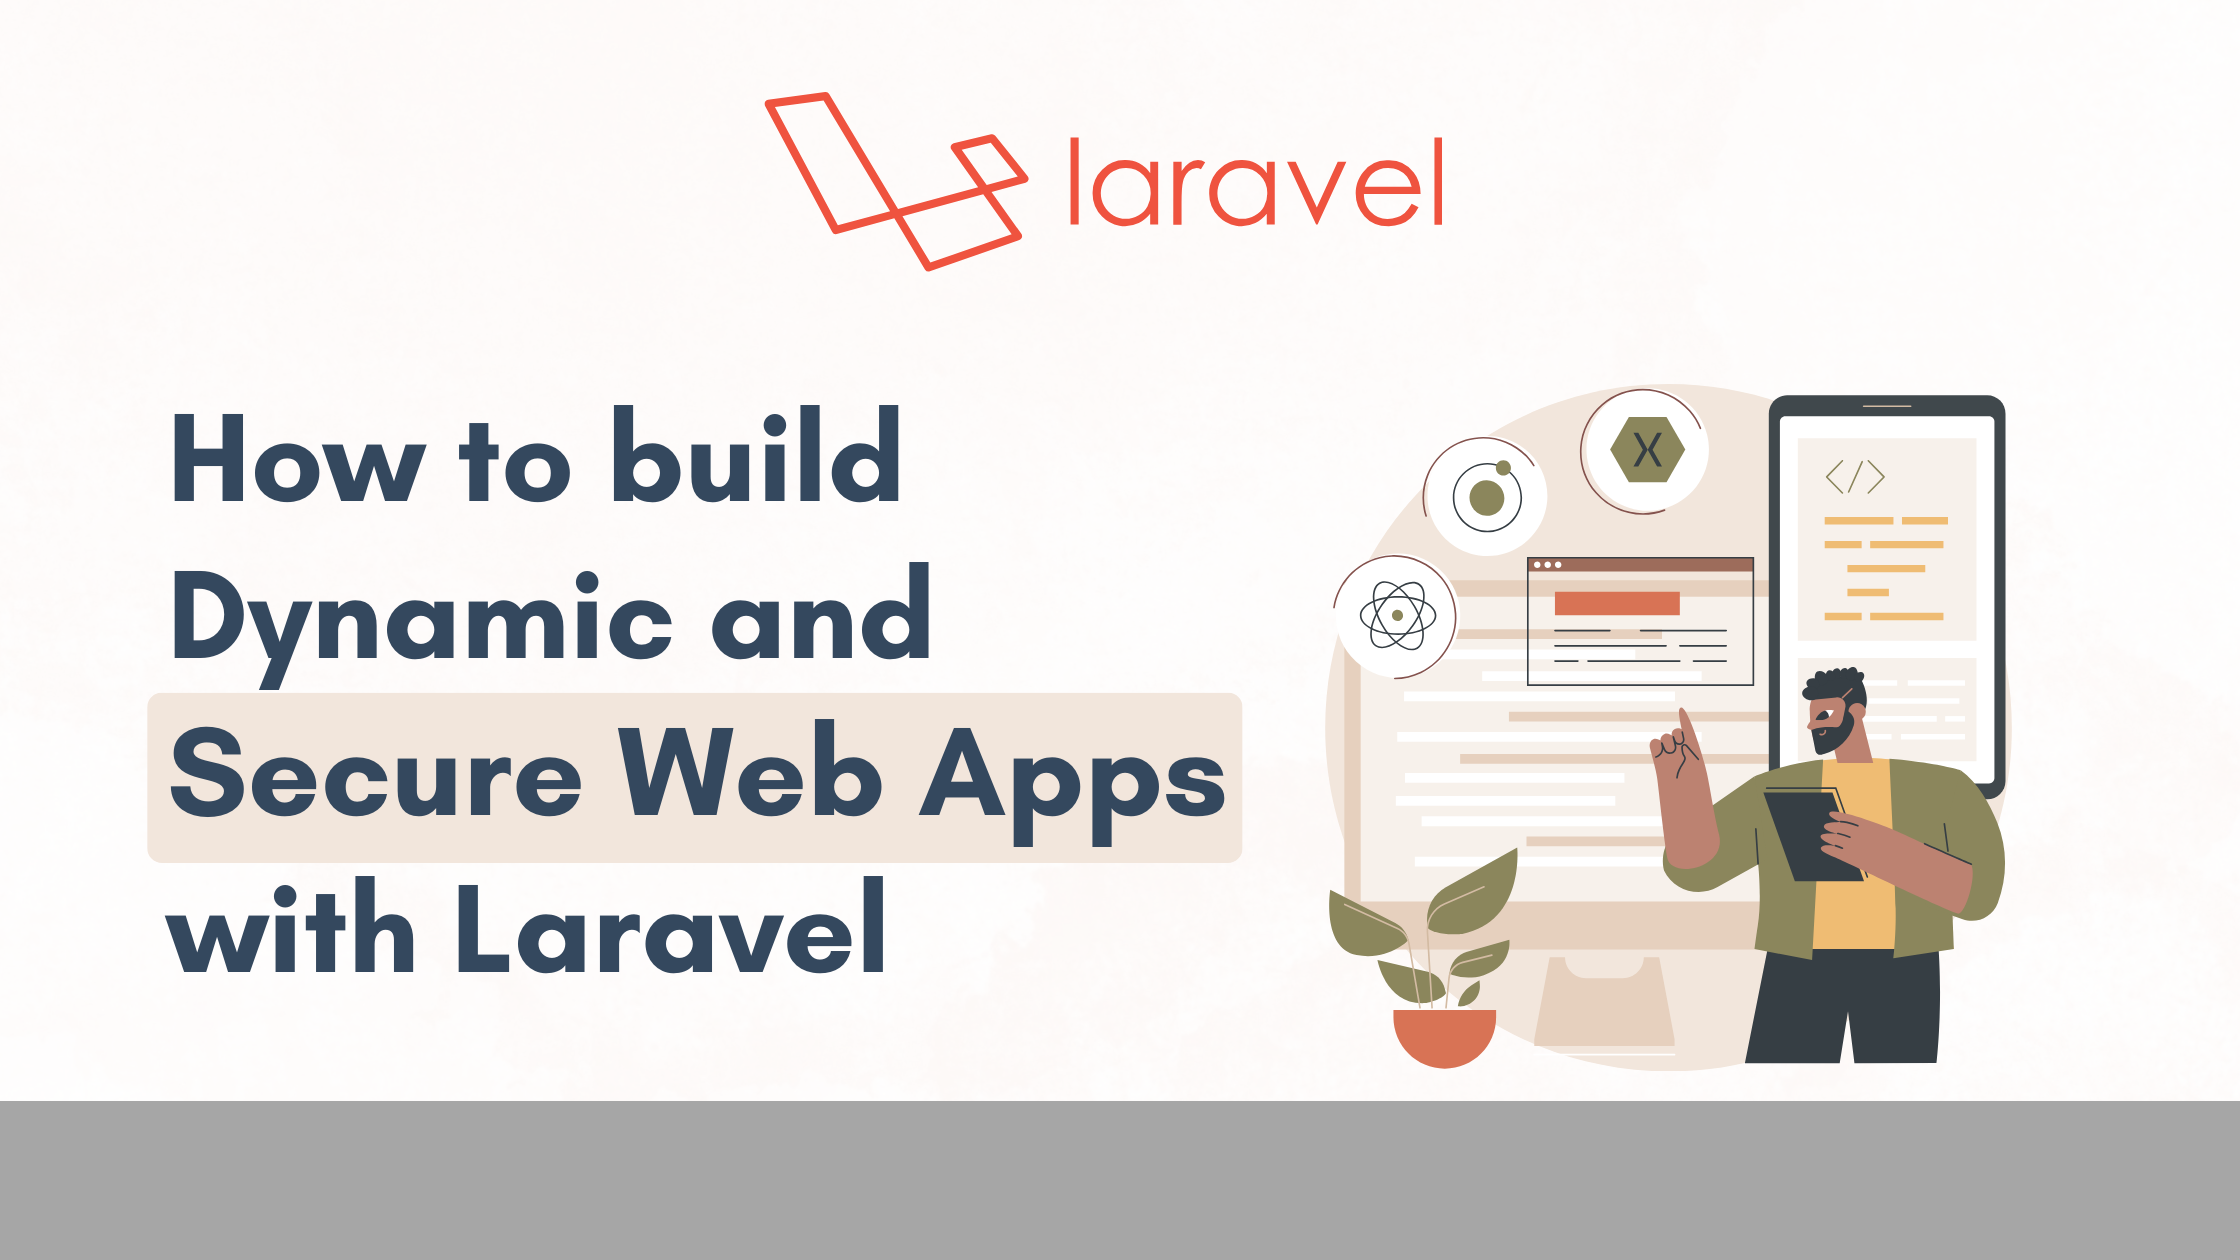 How to build Dynamic and Secure Web Apps with Laravel